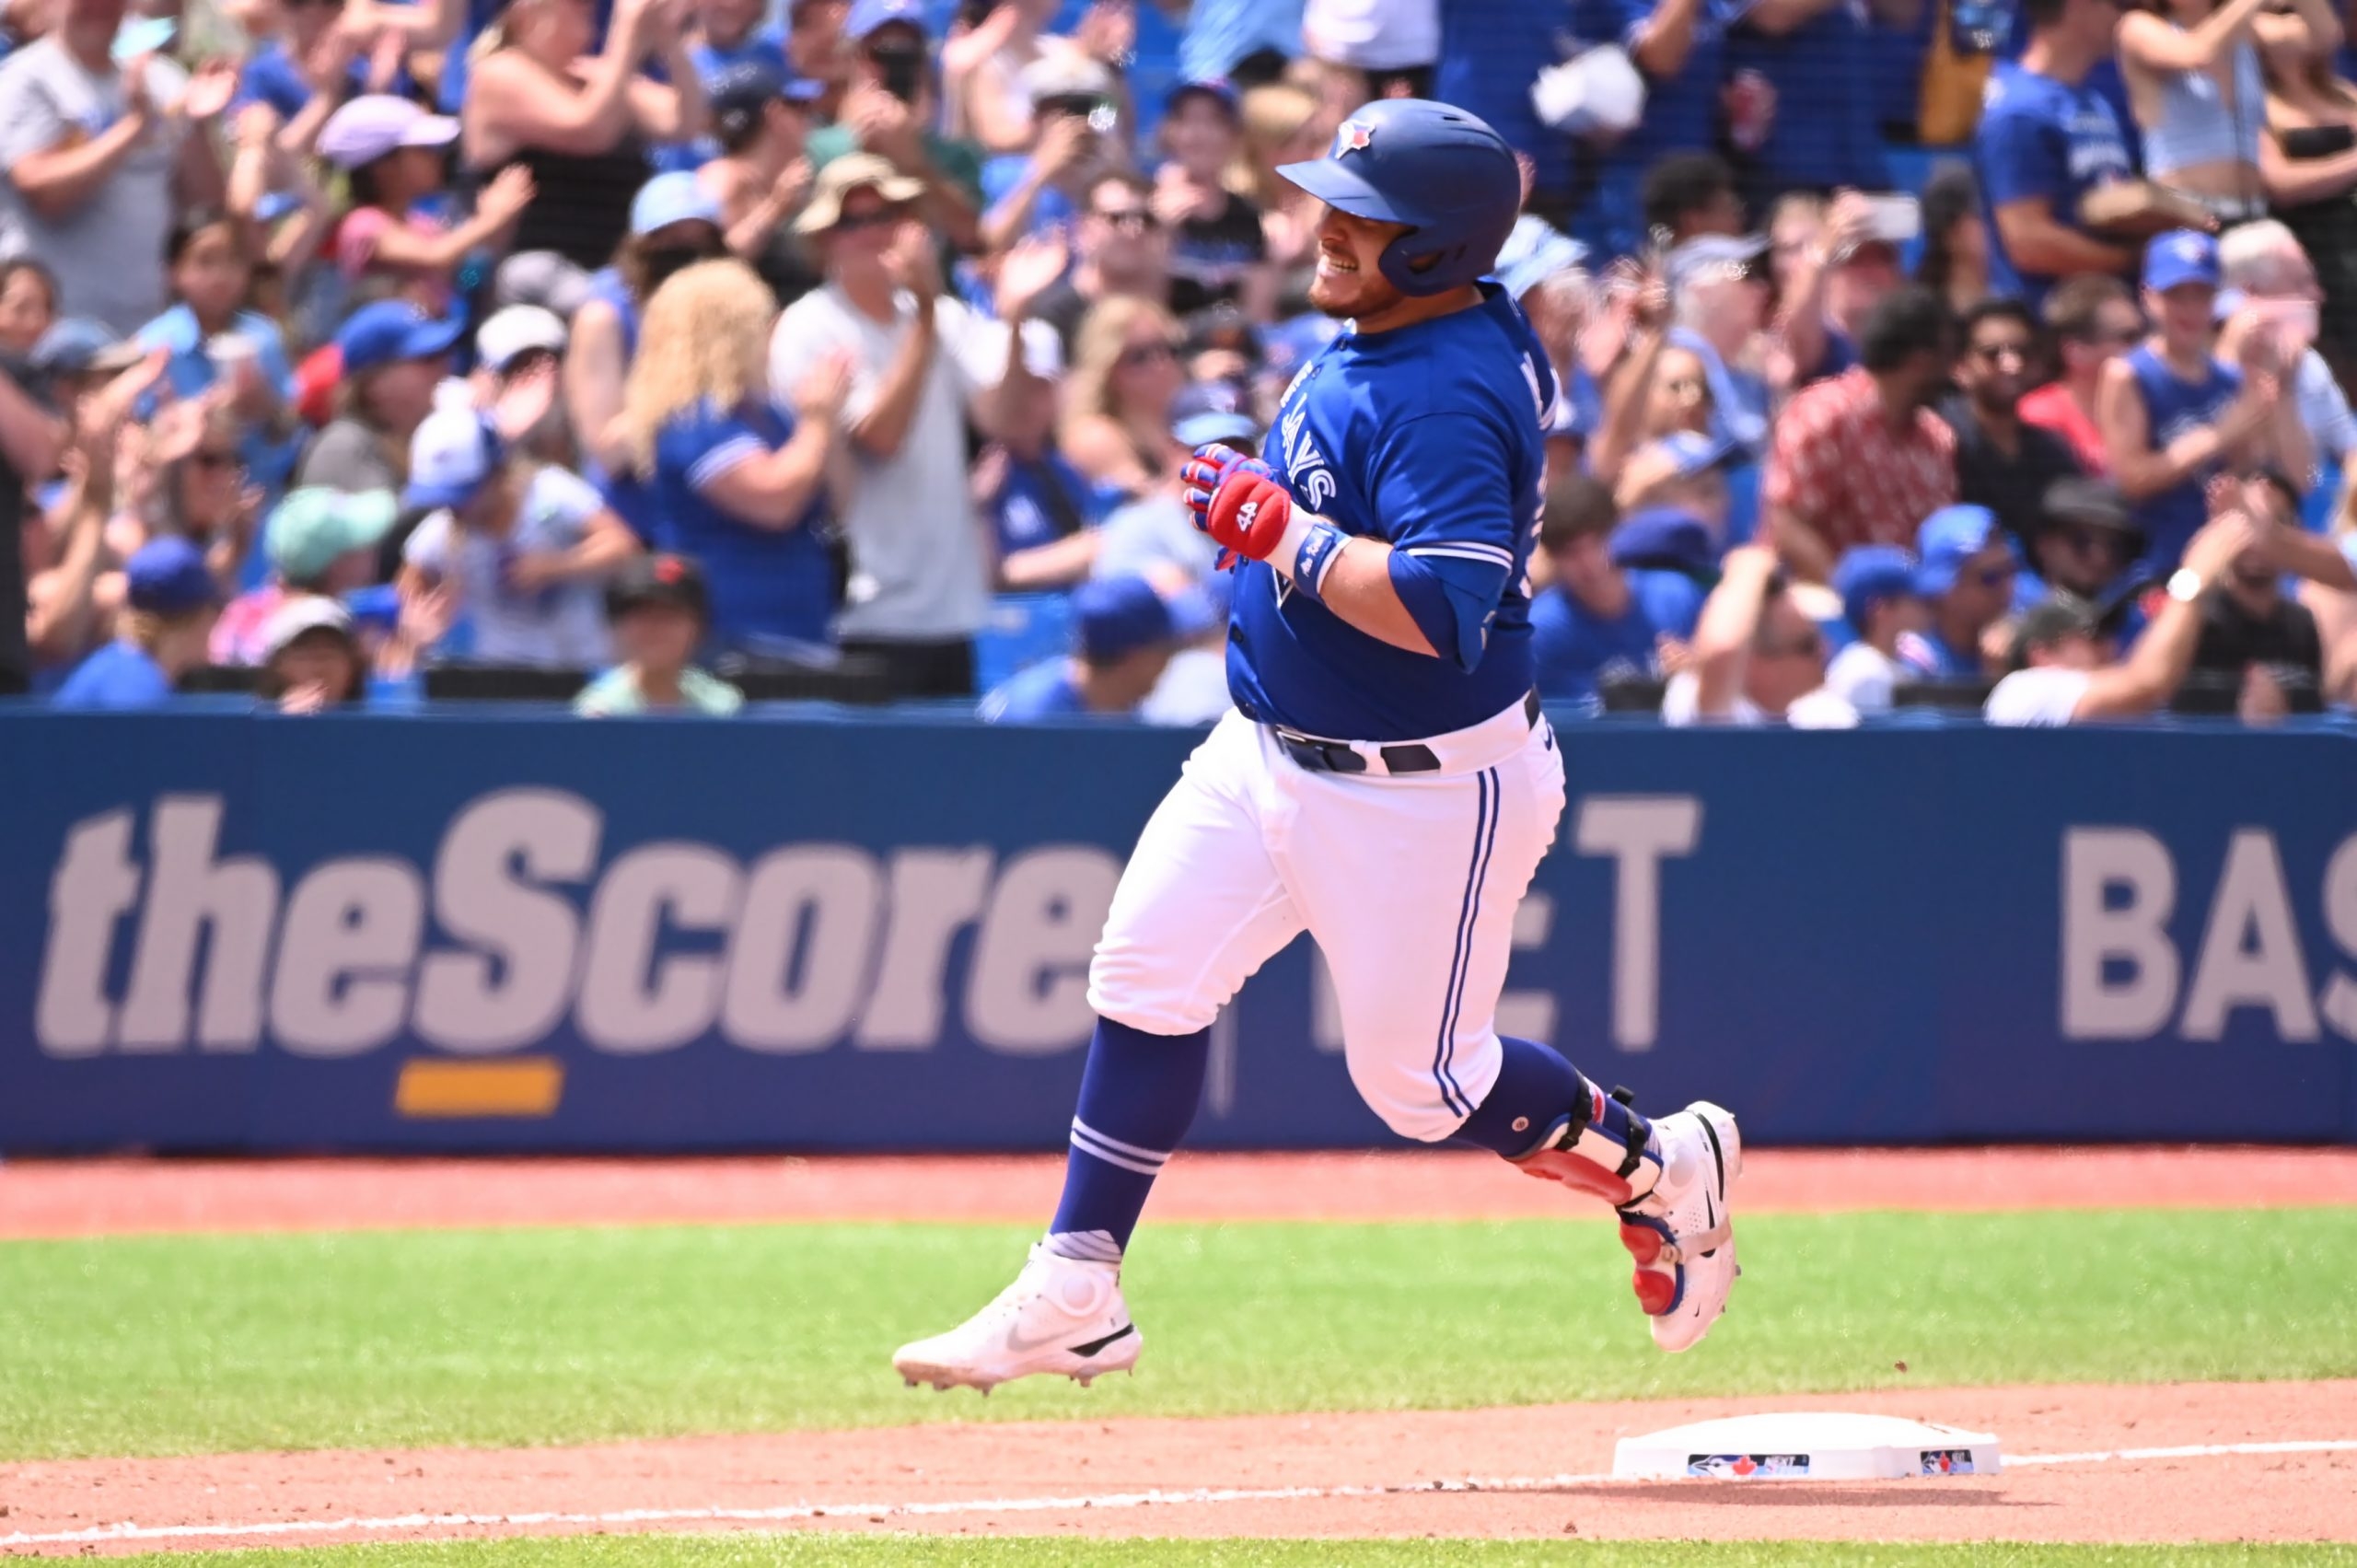 THE OUTLIER ALL-STAR: How the Blue Jays landed a gem in Alejandro Kirk